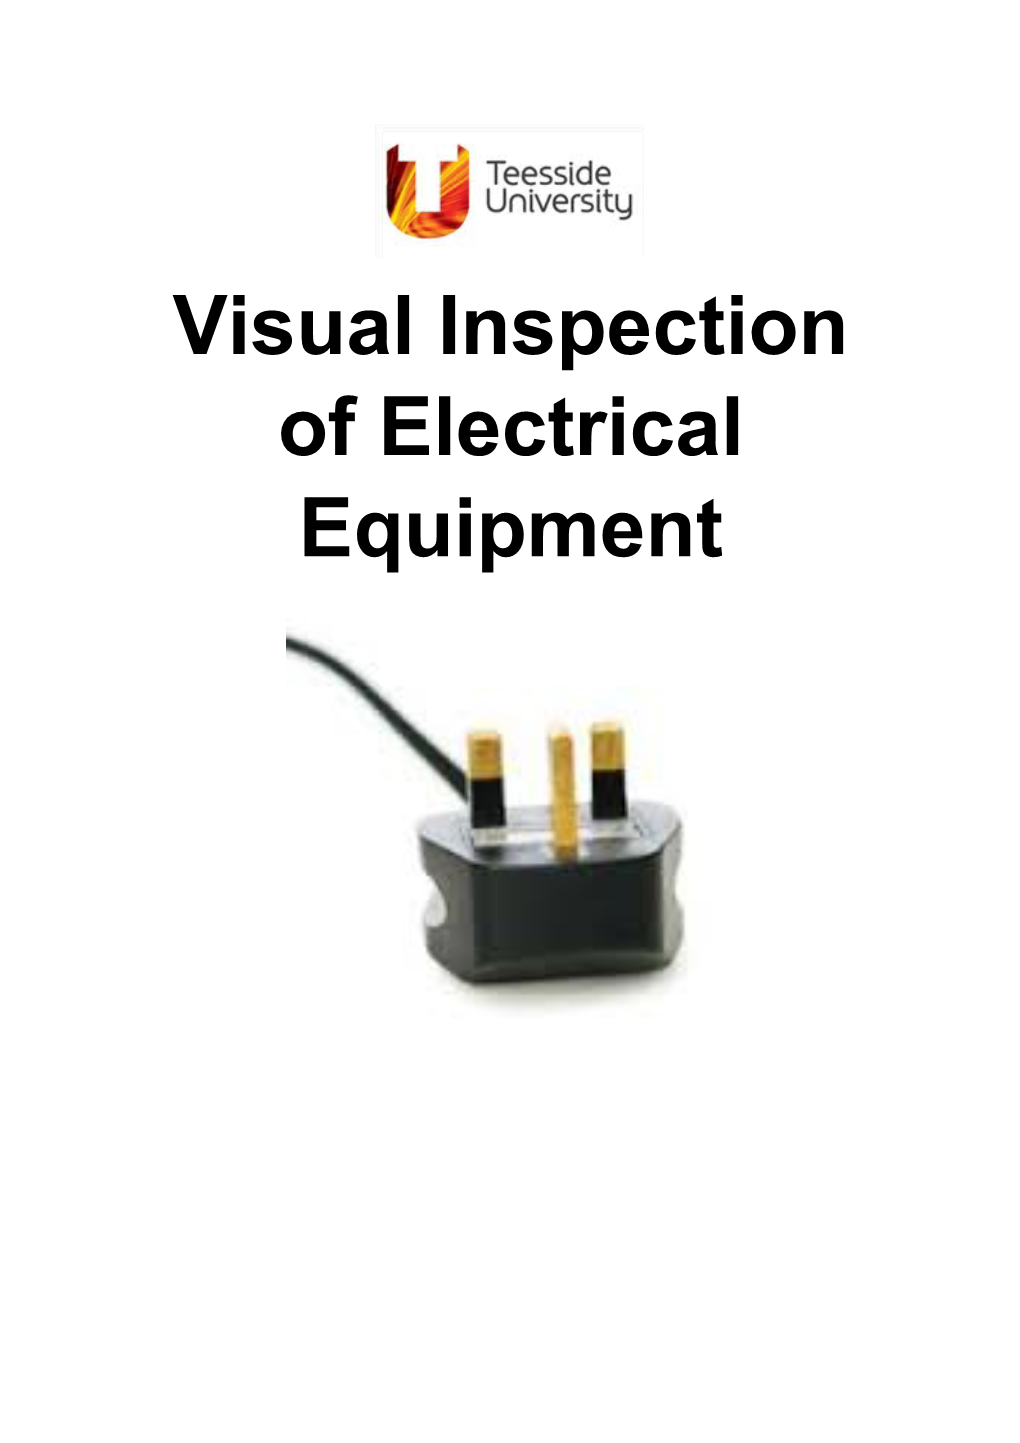 Visual Inspection of Electrical Equipment